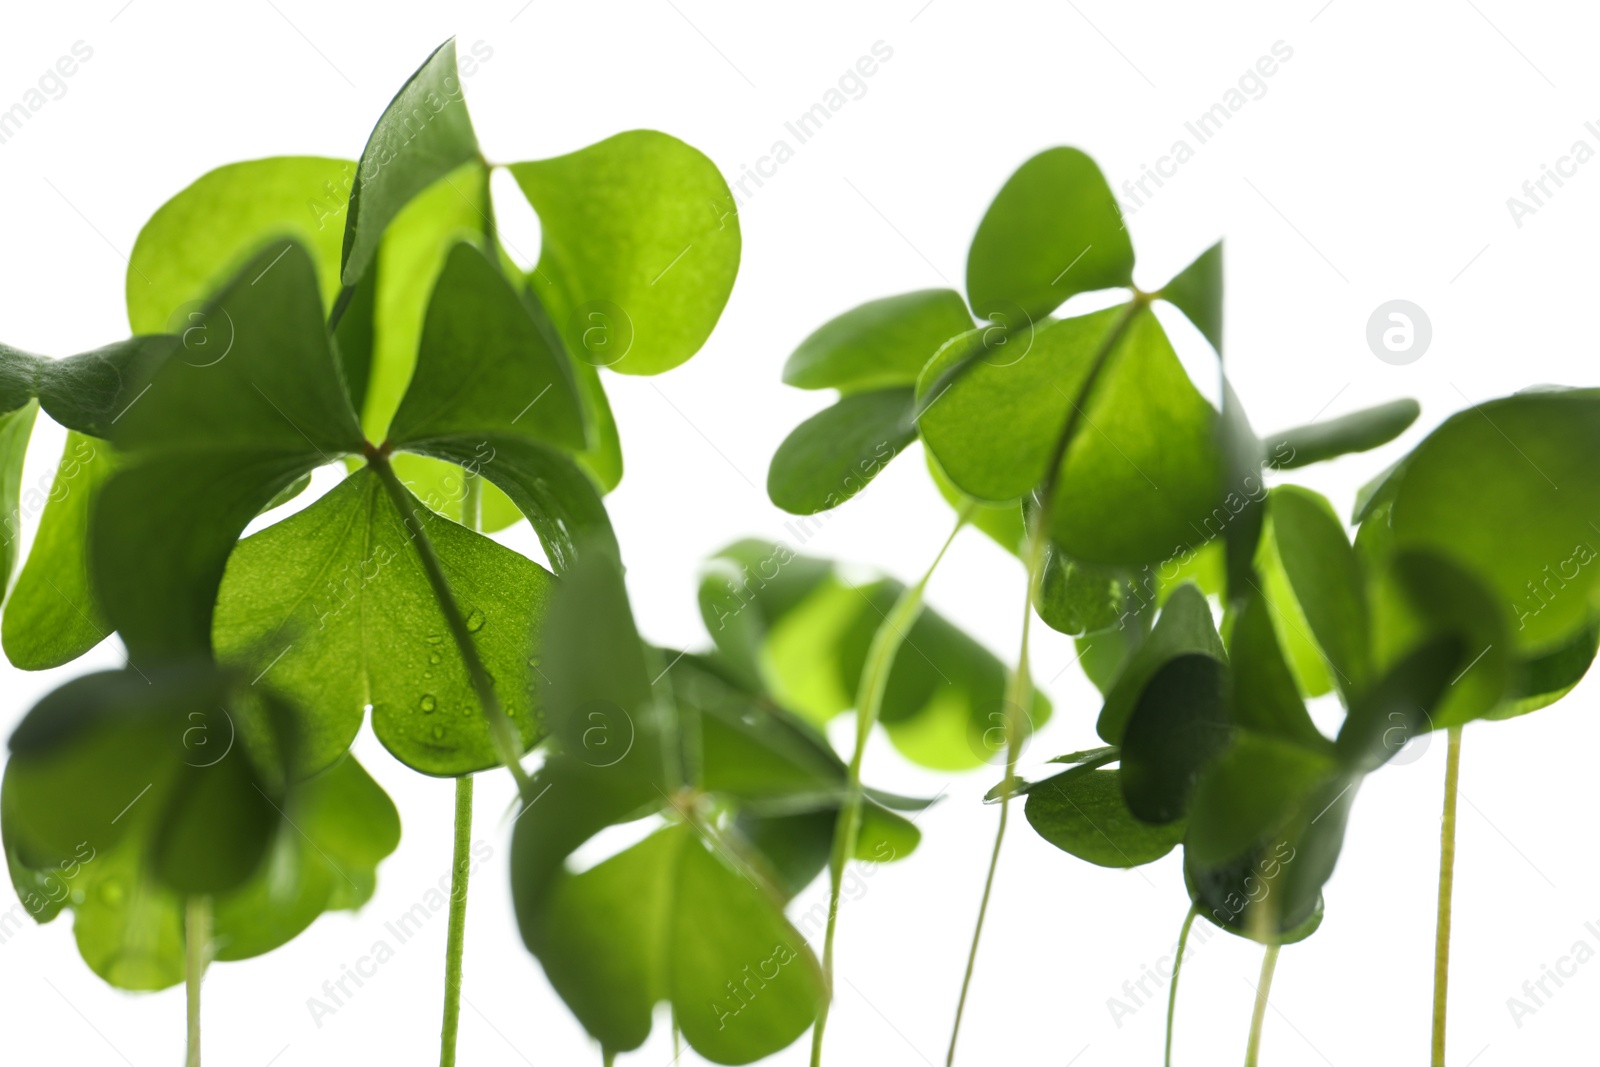 Photo of Clover leaves on white background, closeup. St. Patrick's Day symbol